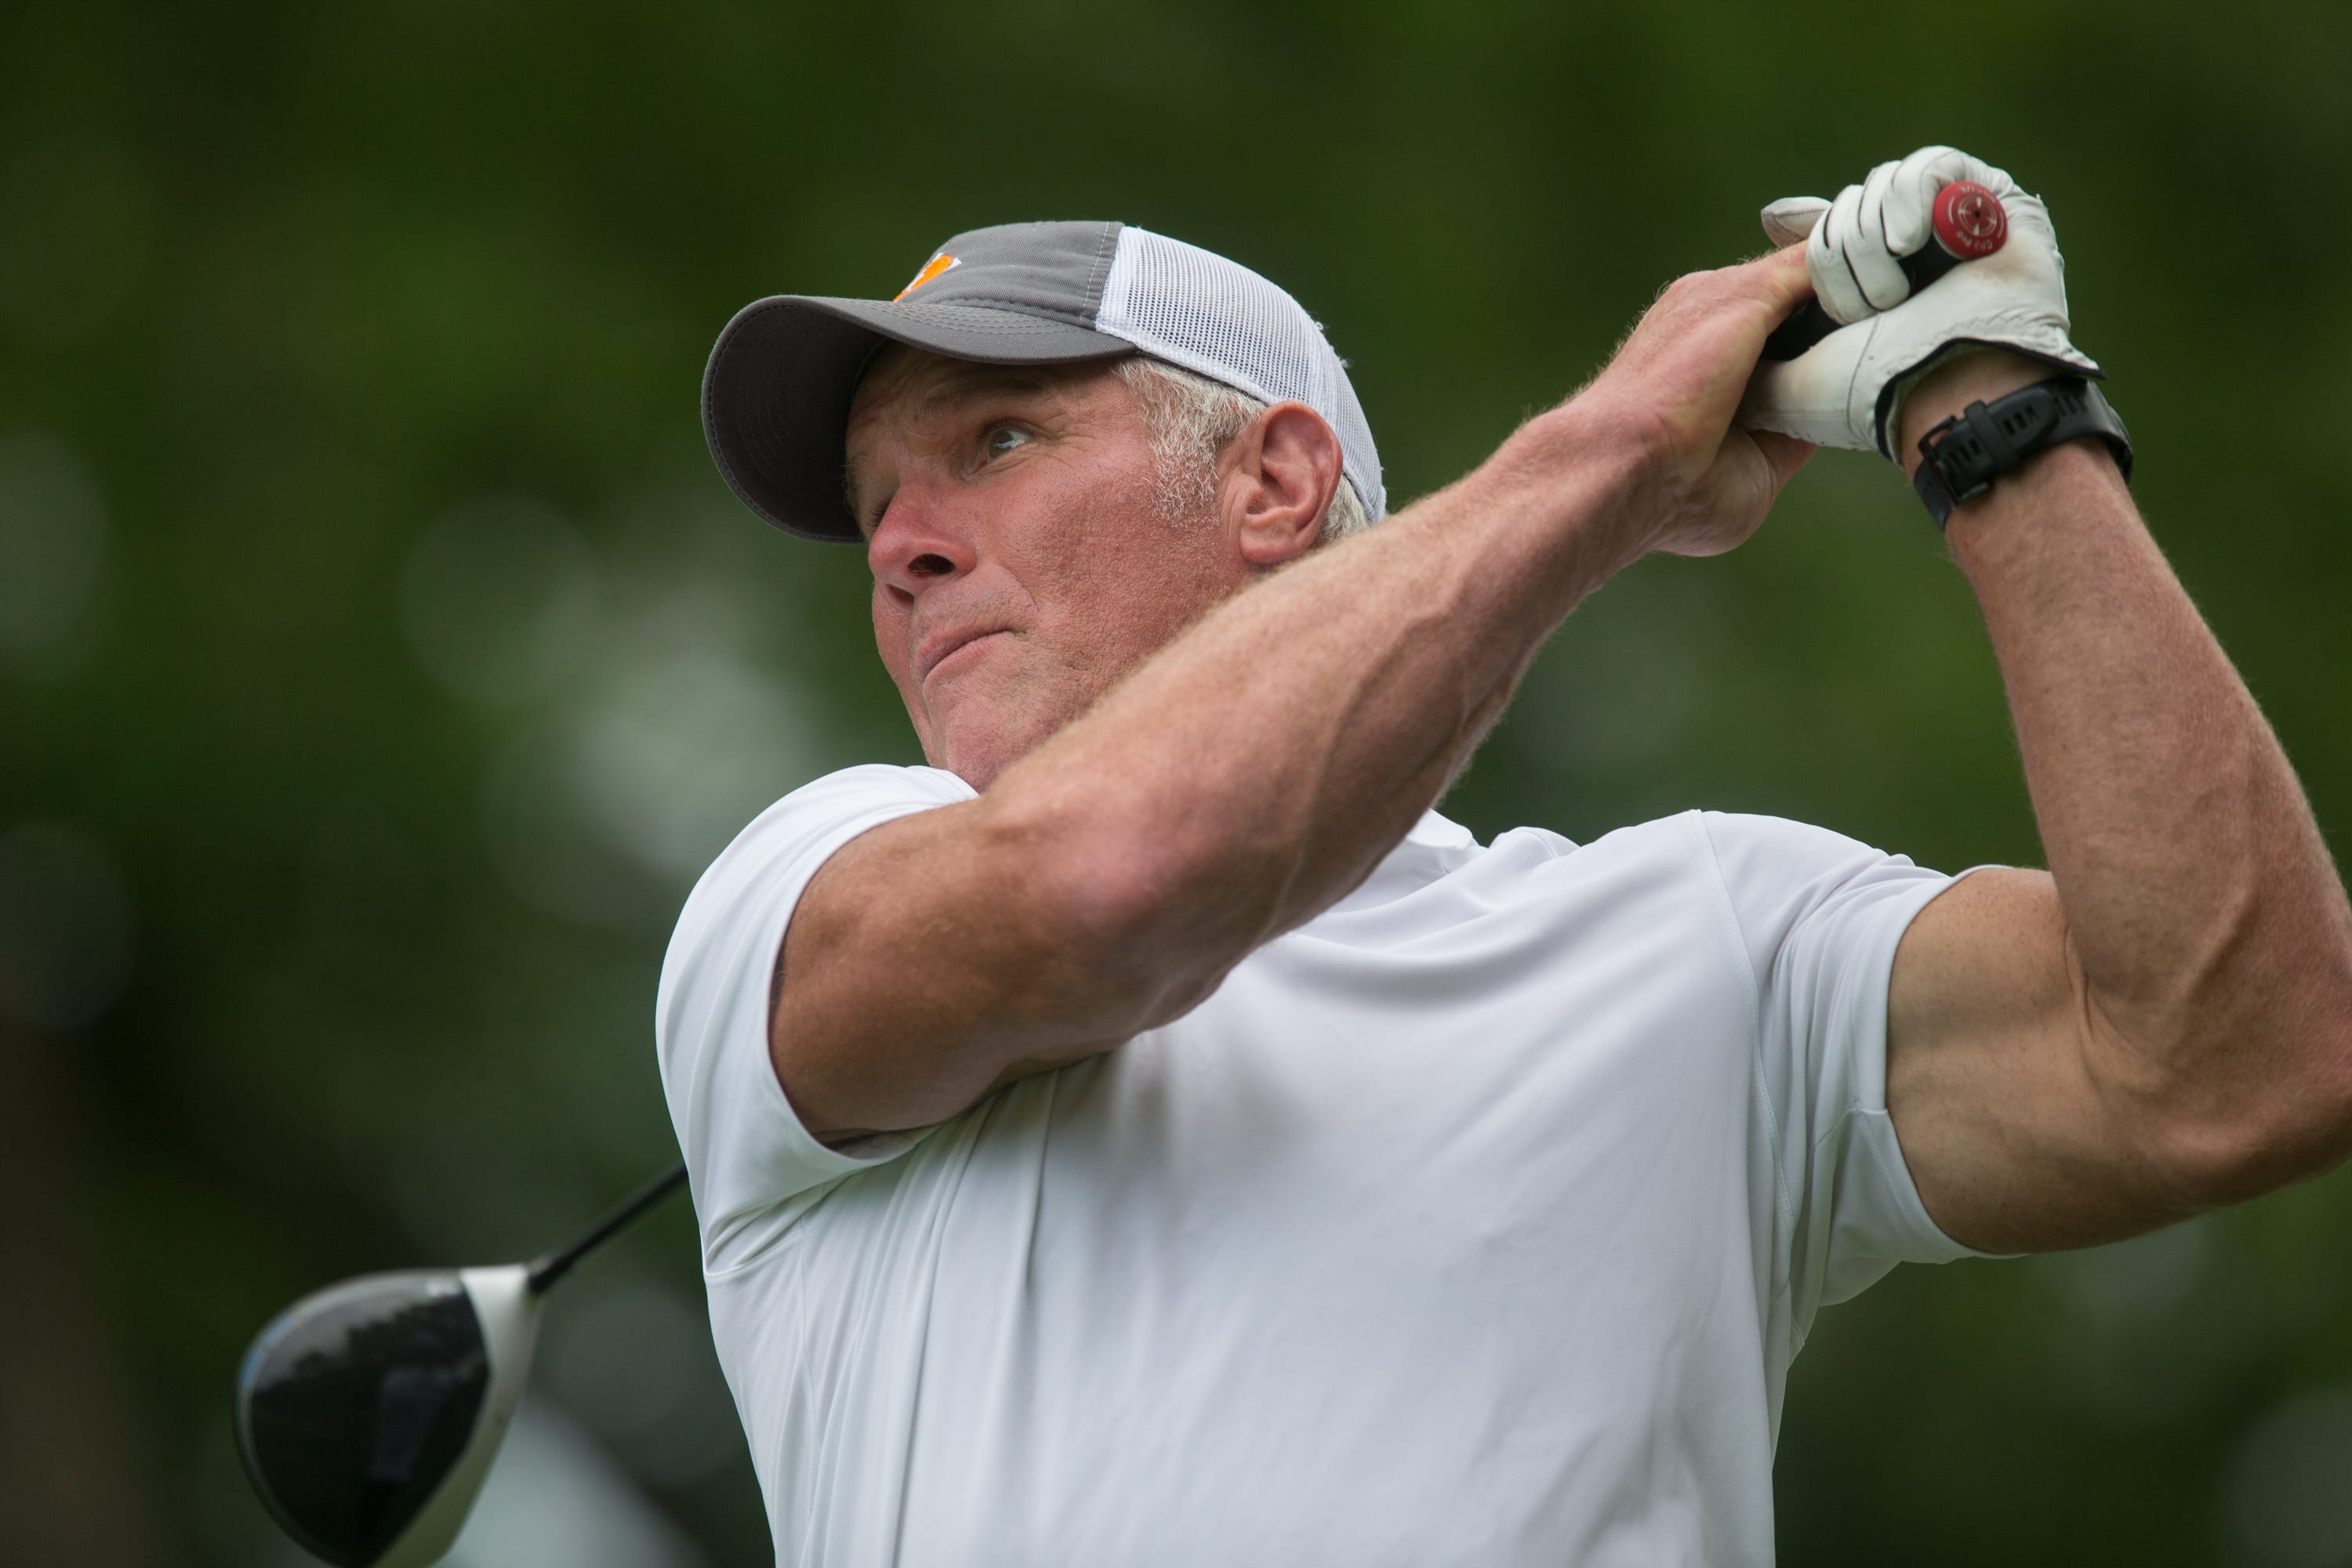 Brett Favre tees off at the 16th hole.